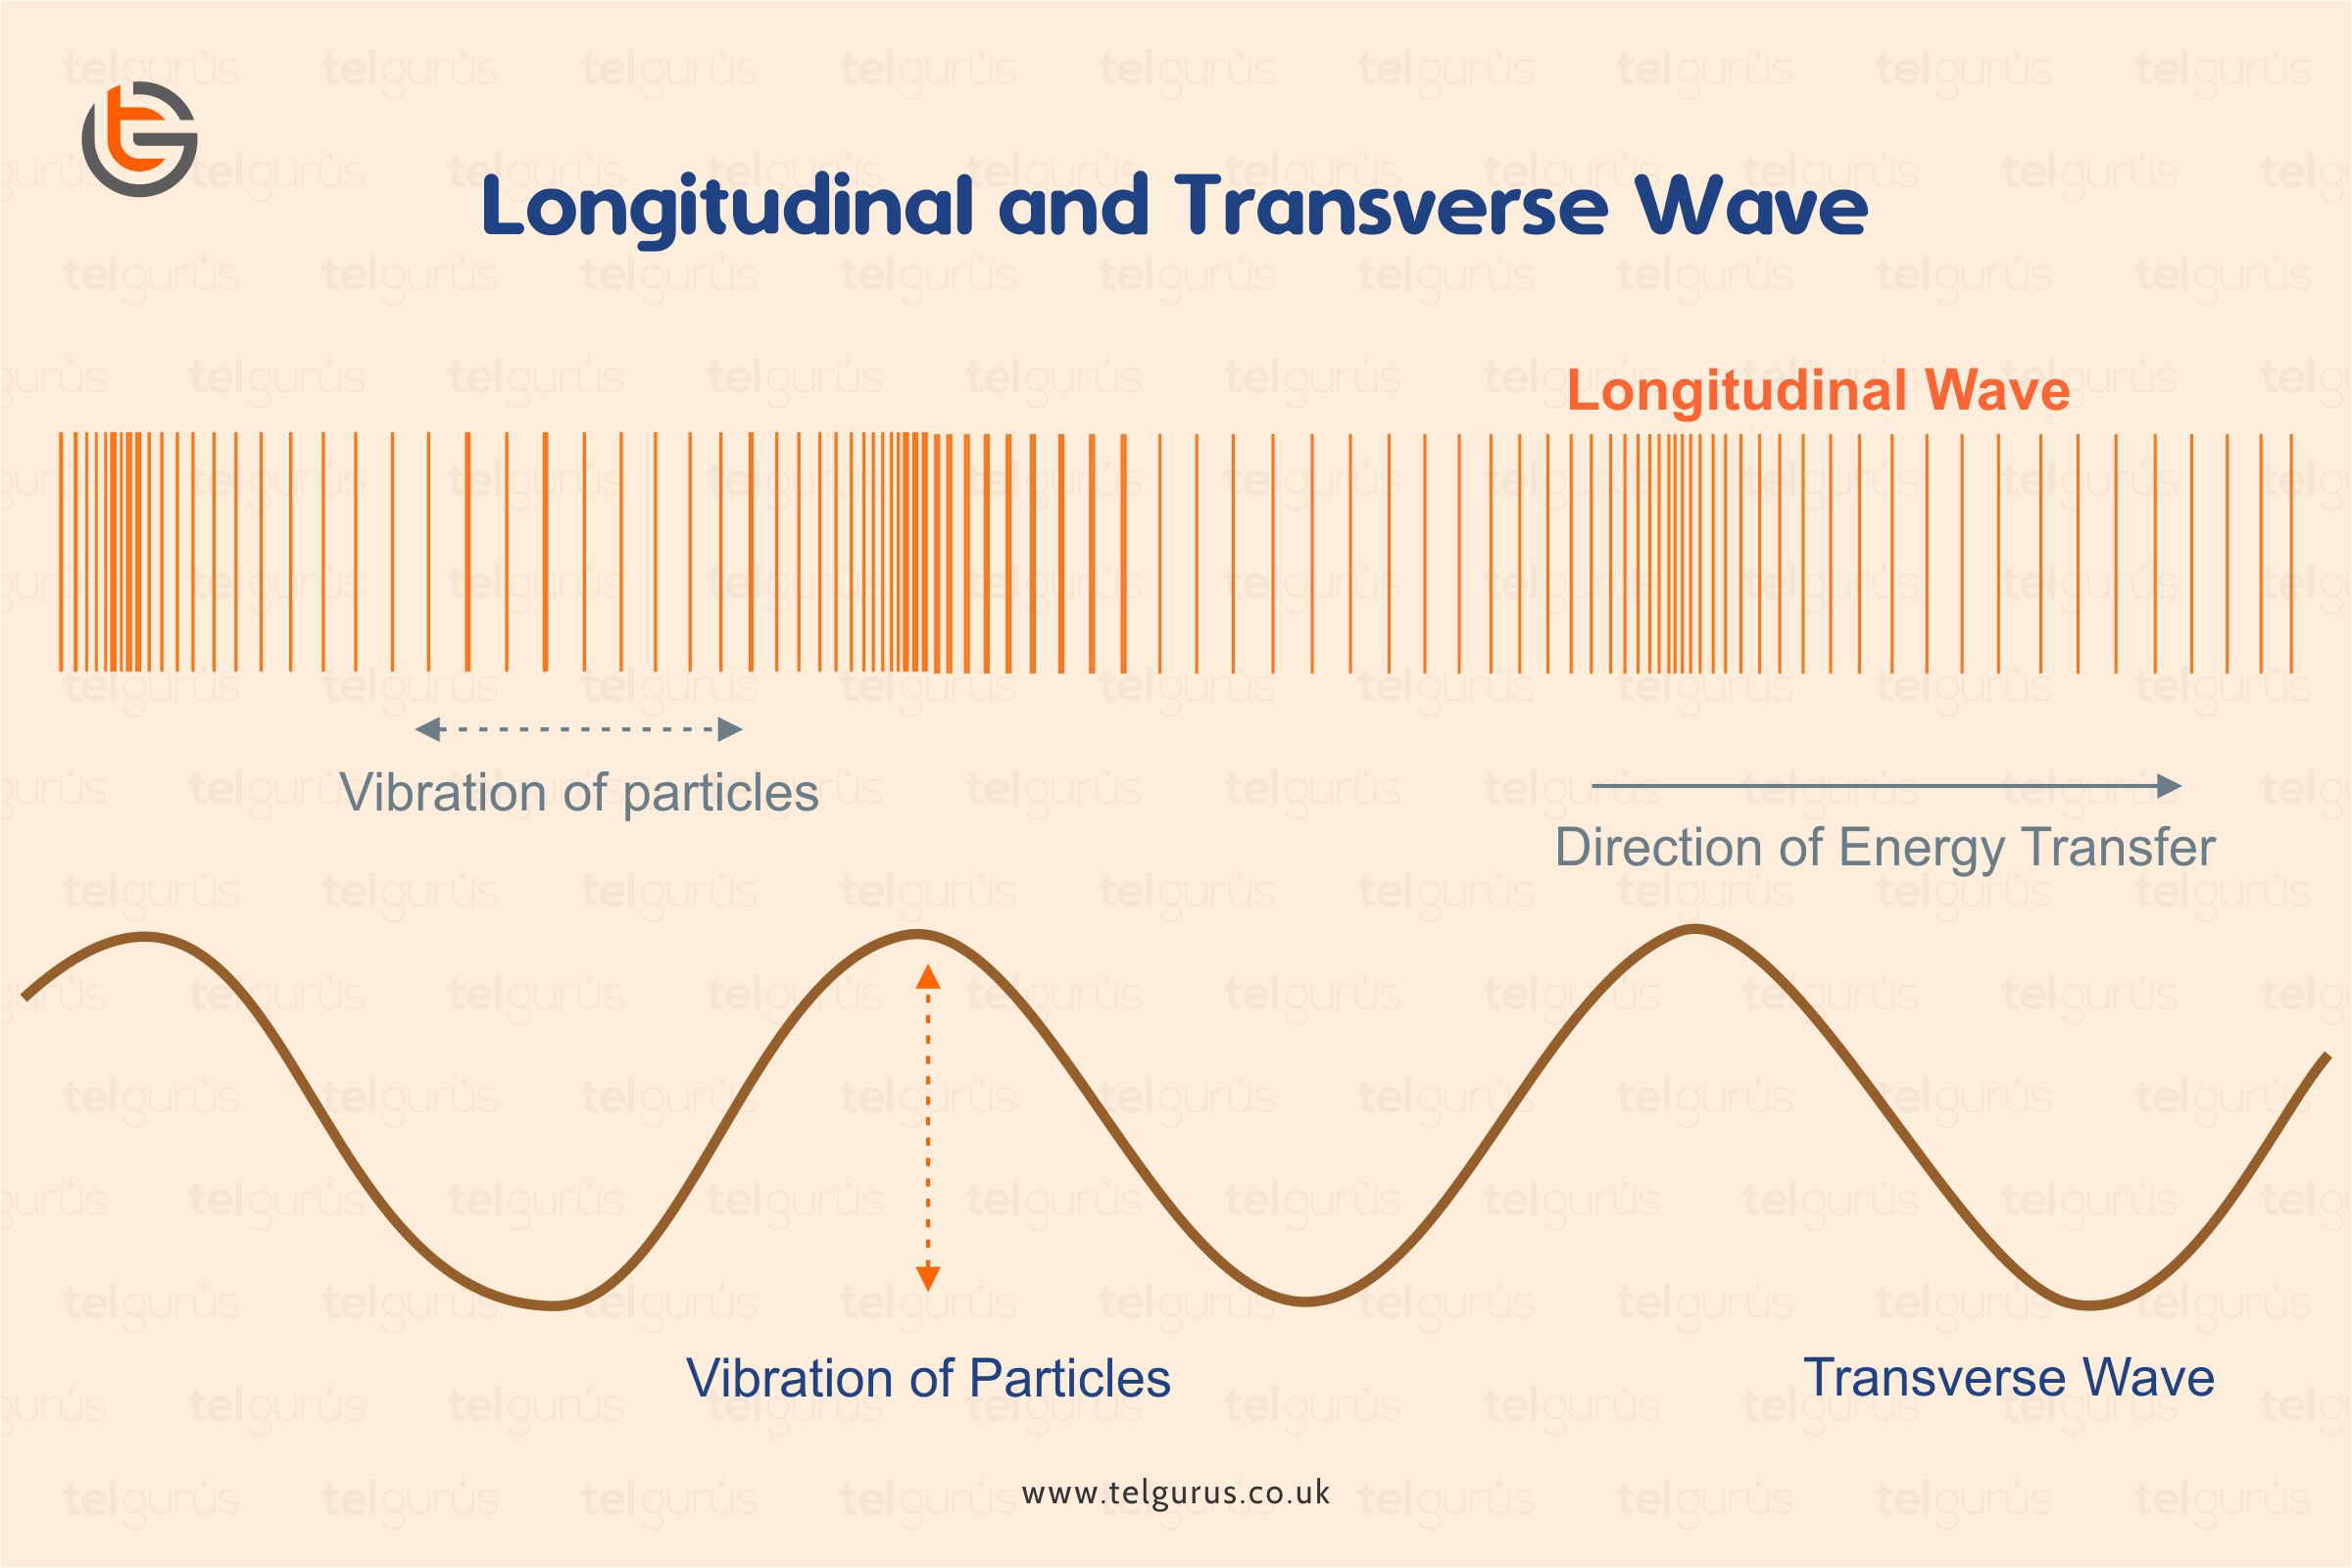 What is the difference between Transverse and Longitudinal waves?